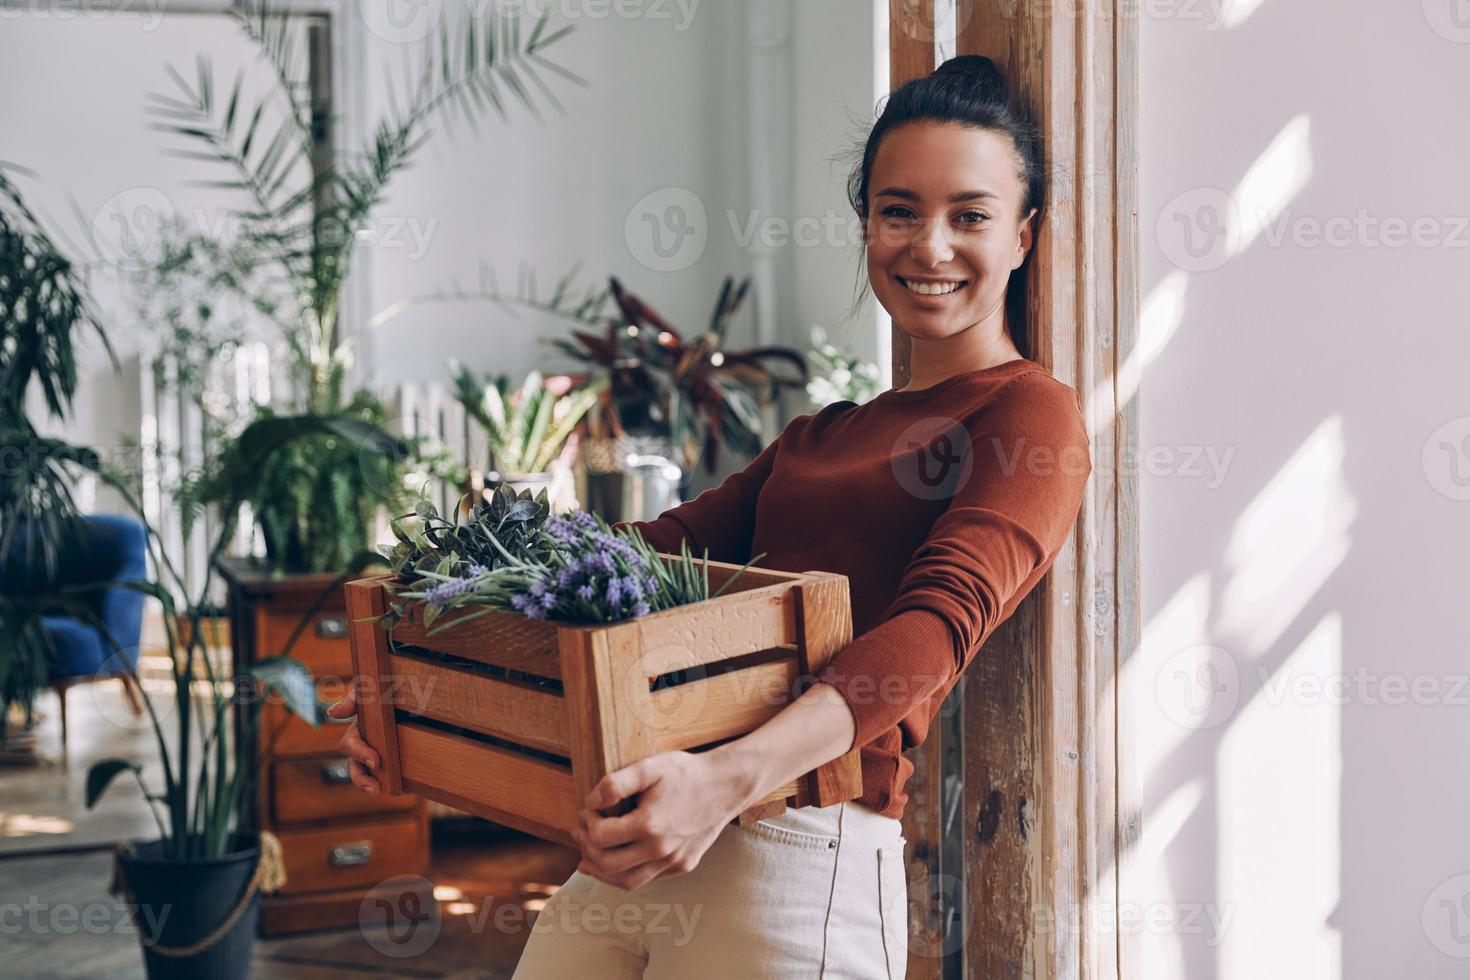 Cheerful young woman carrying wooden crate with plants while leaning at the doorway at home photo